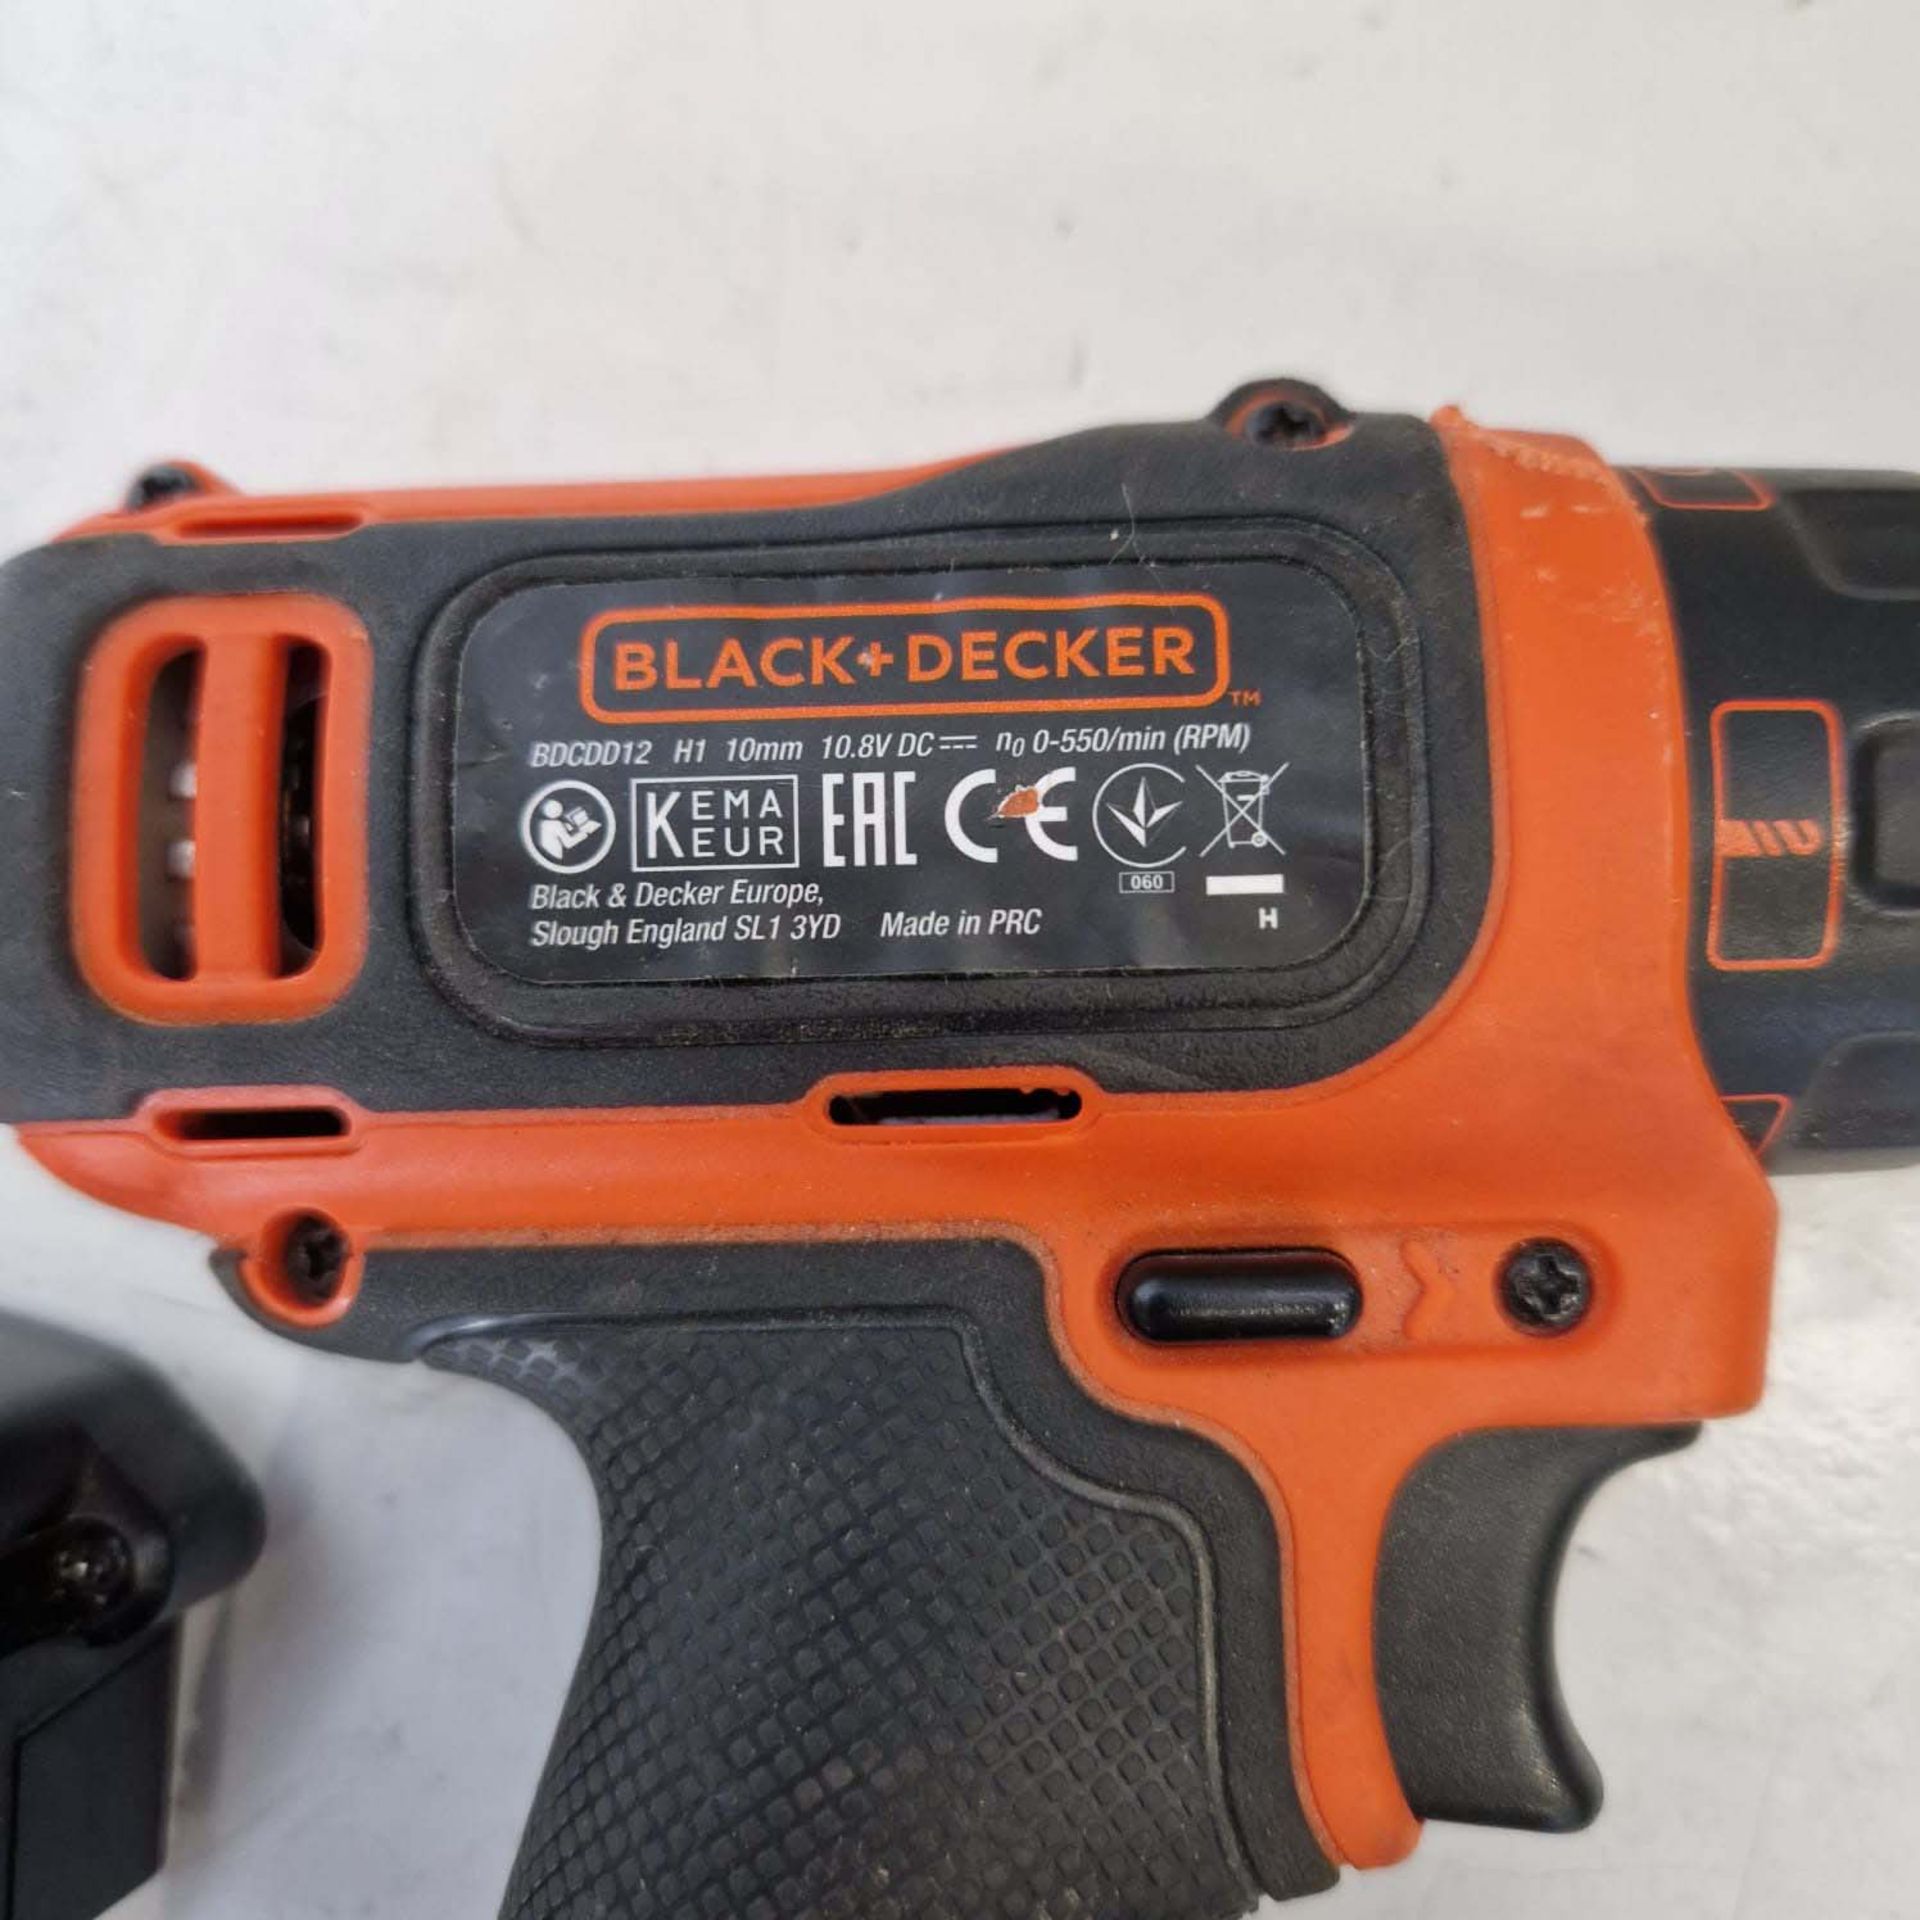 Black & Decker Model BDCDD12 Cordless Drill with Lithium 10.8V Battery & Charger. Capacity 10mm. - Image 3 of 4